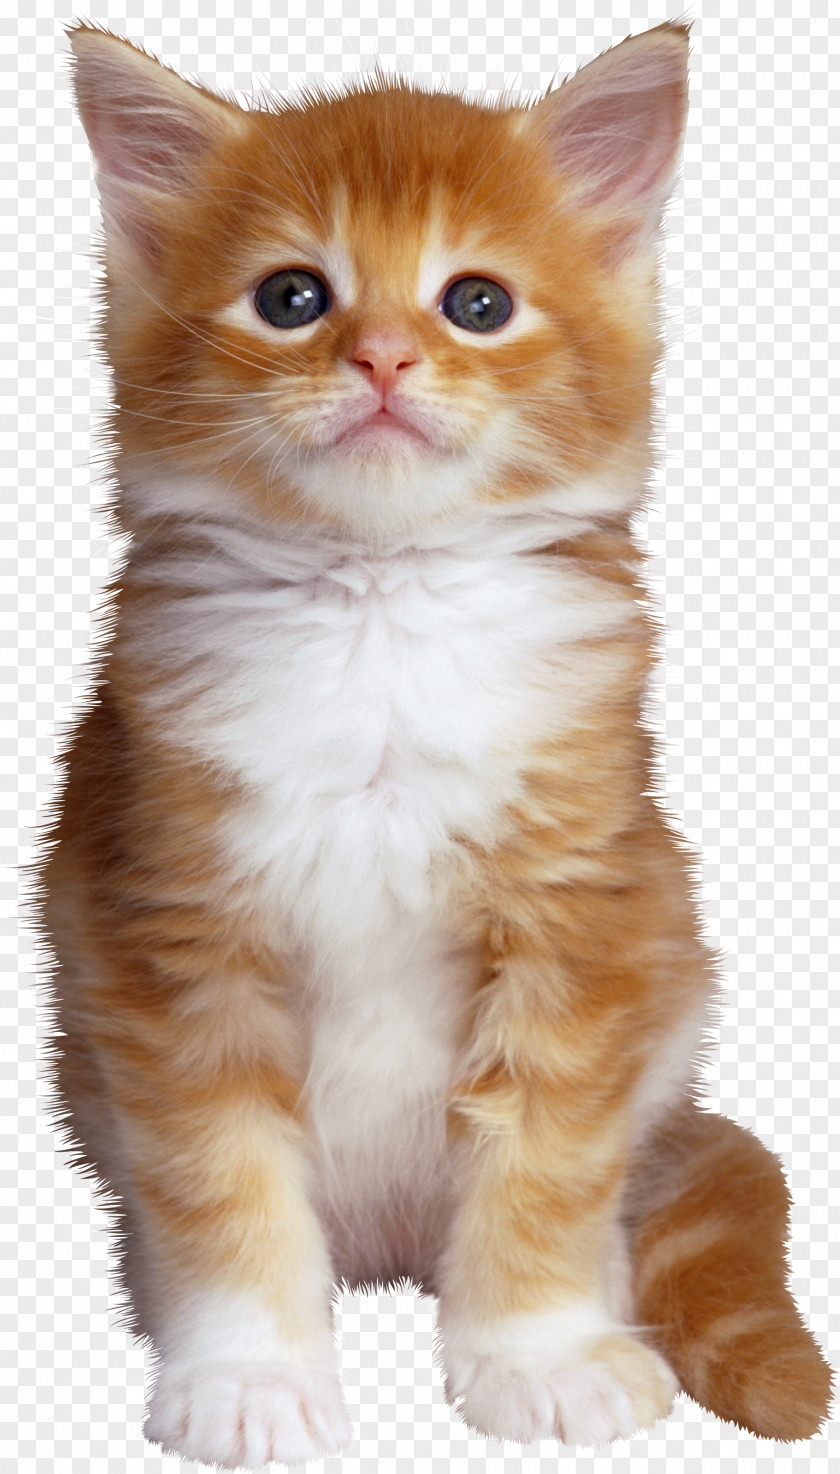 Kitty PNG clipart PNG